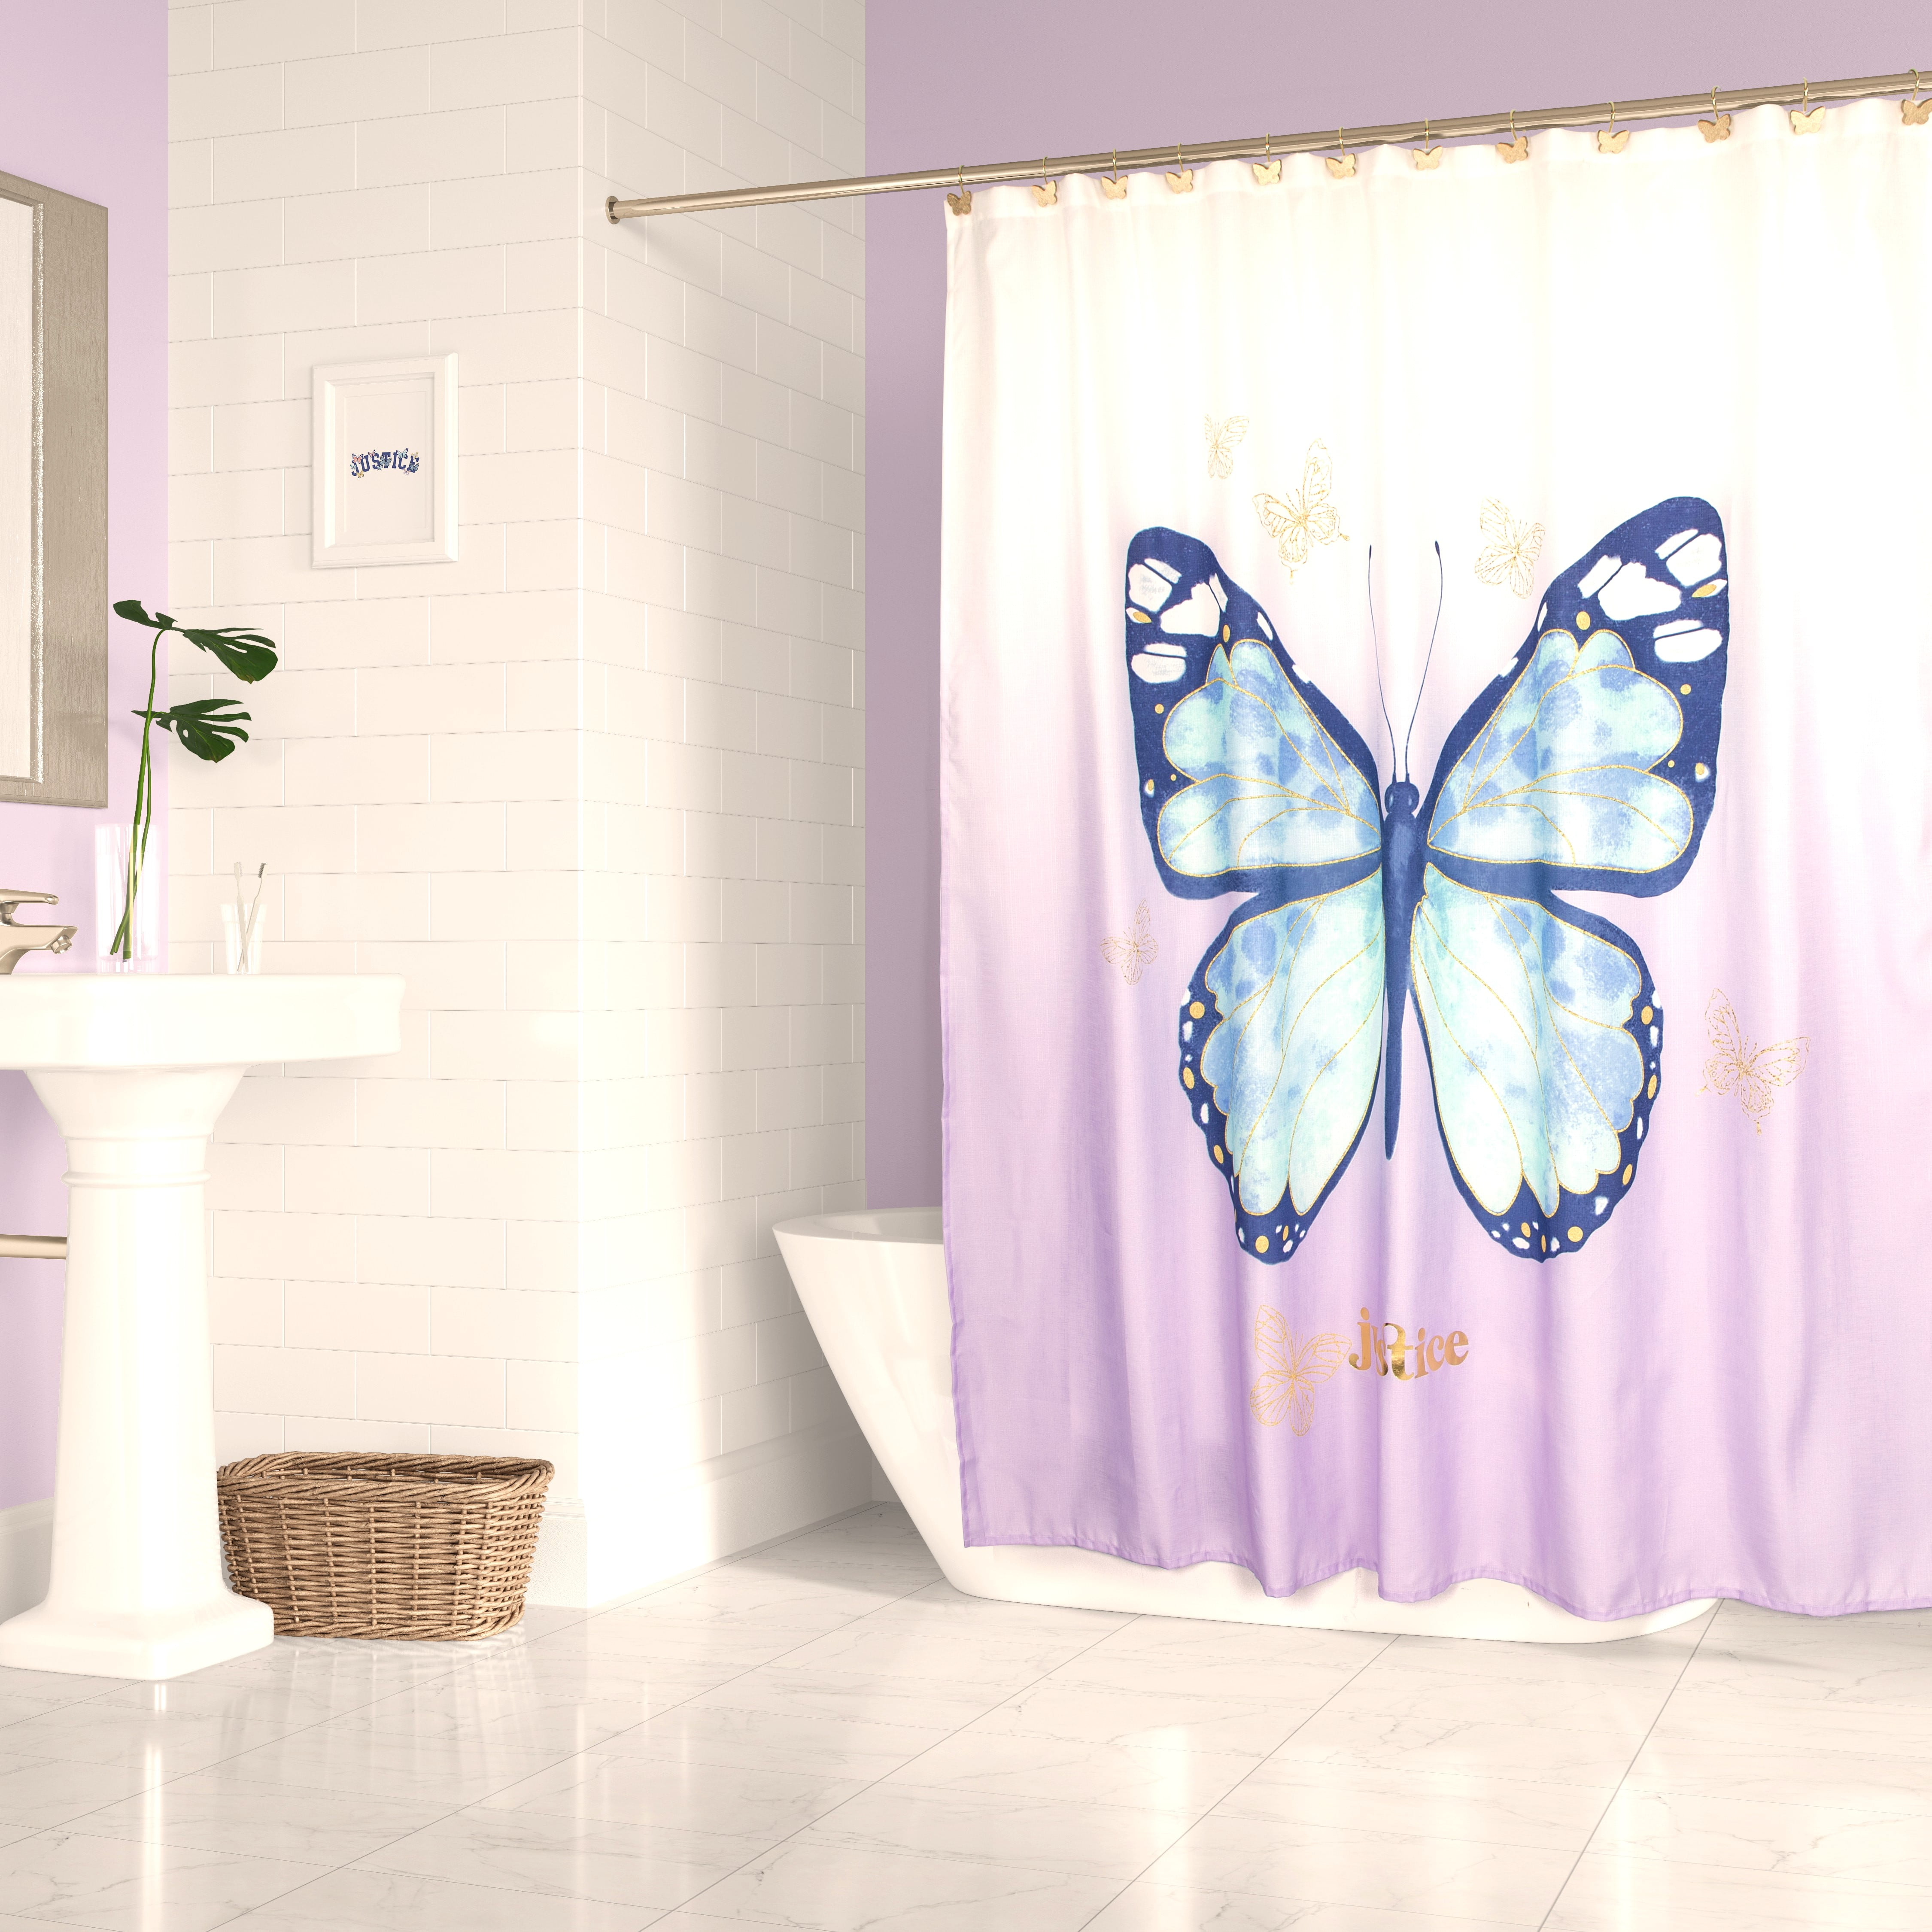 Red Rose & Butterfly Waterproof Bathroom Shower Curtain Toilet Cover Mat Rug Kit 